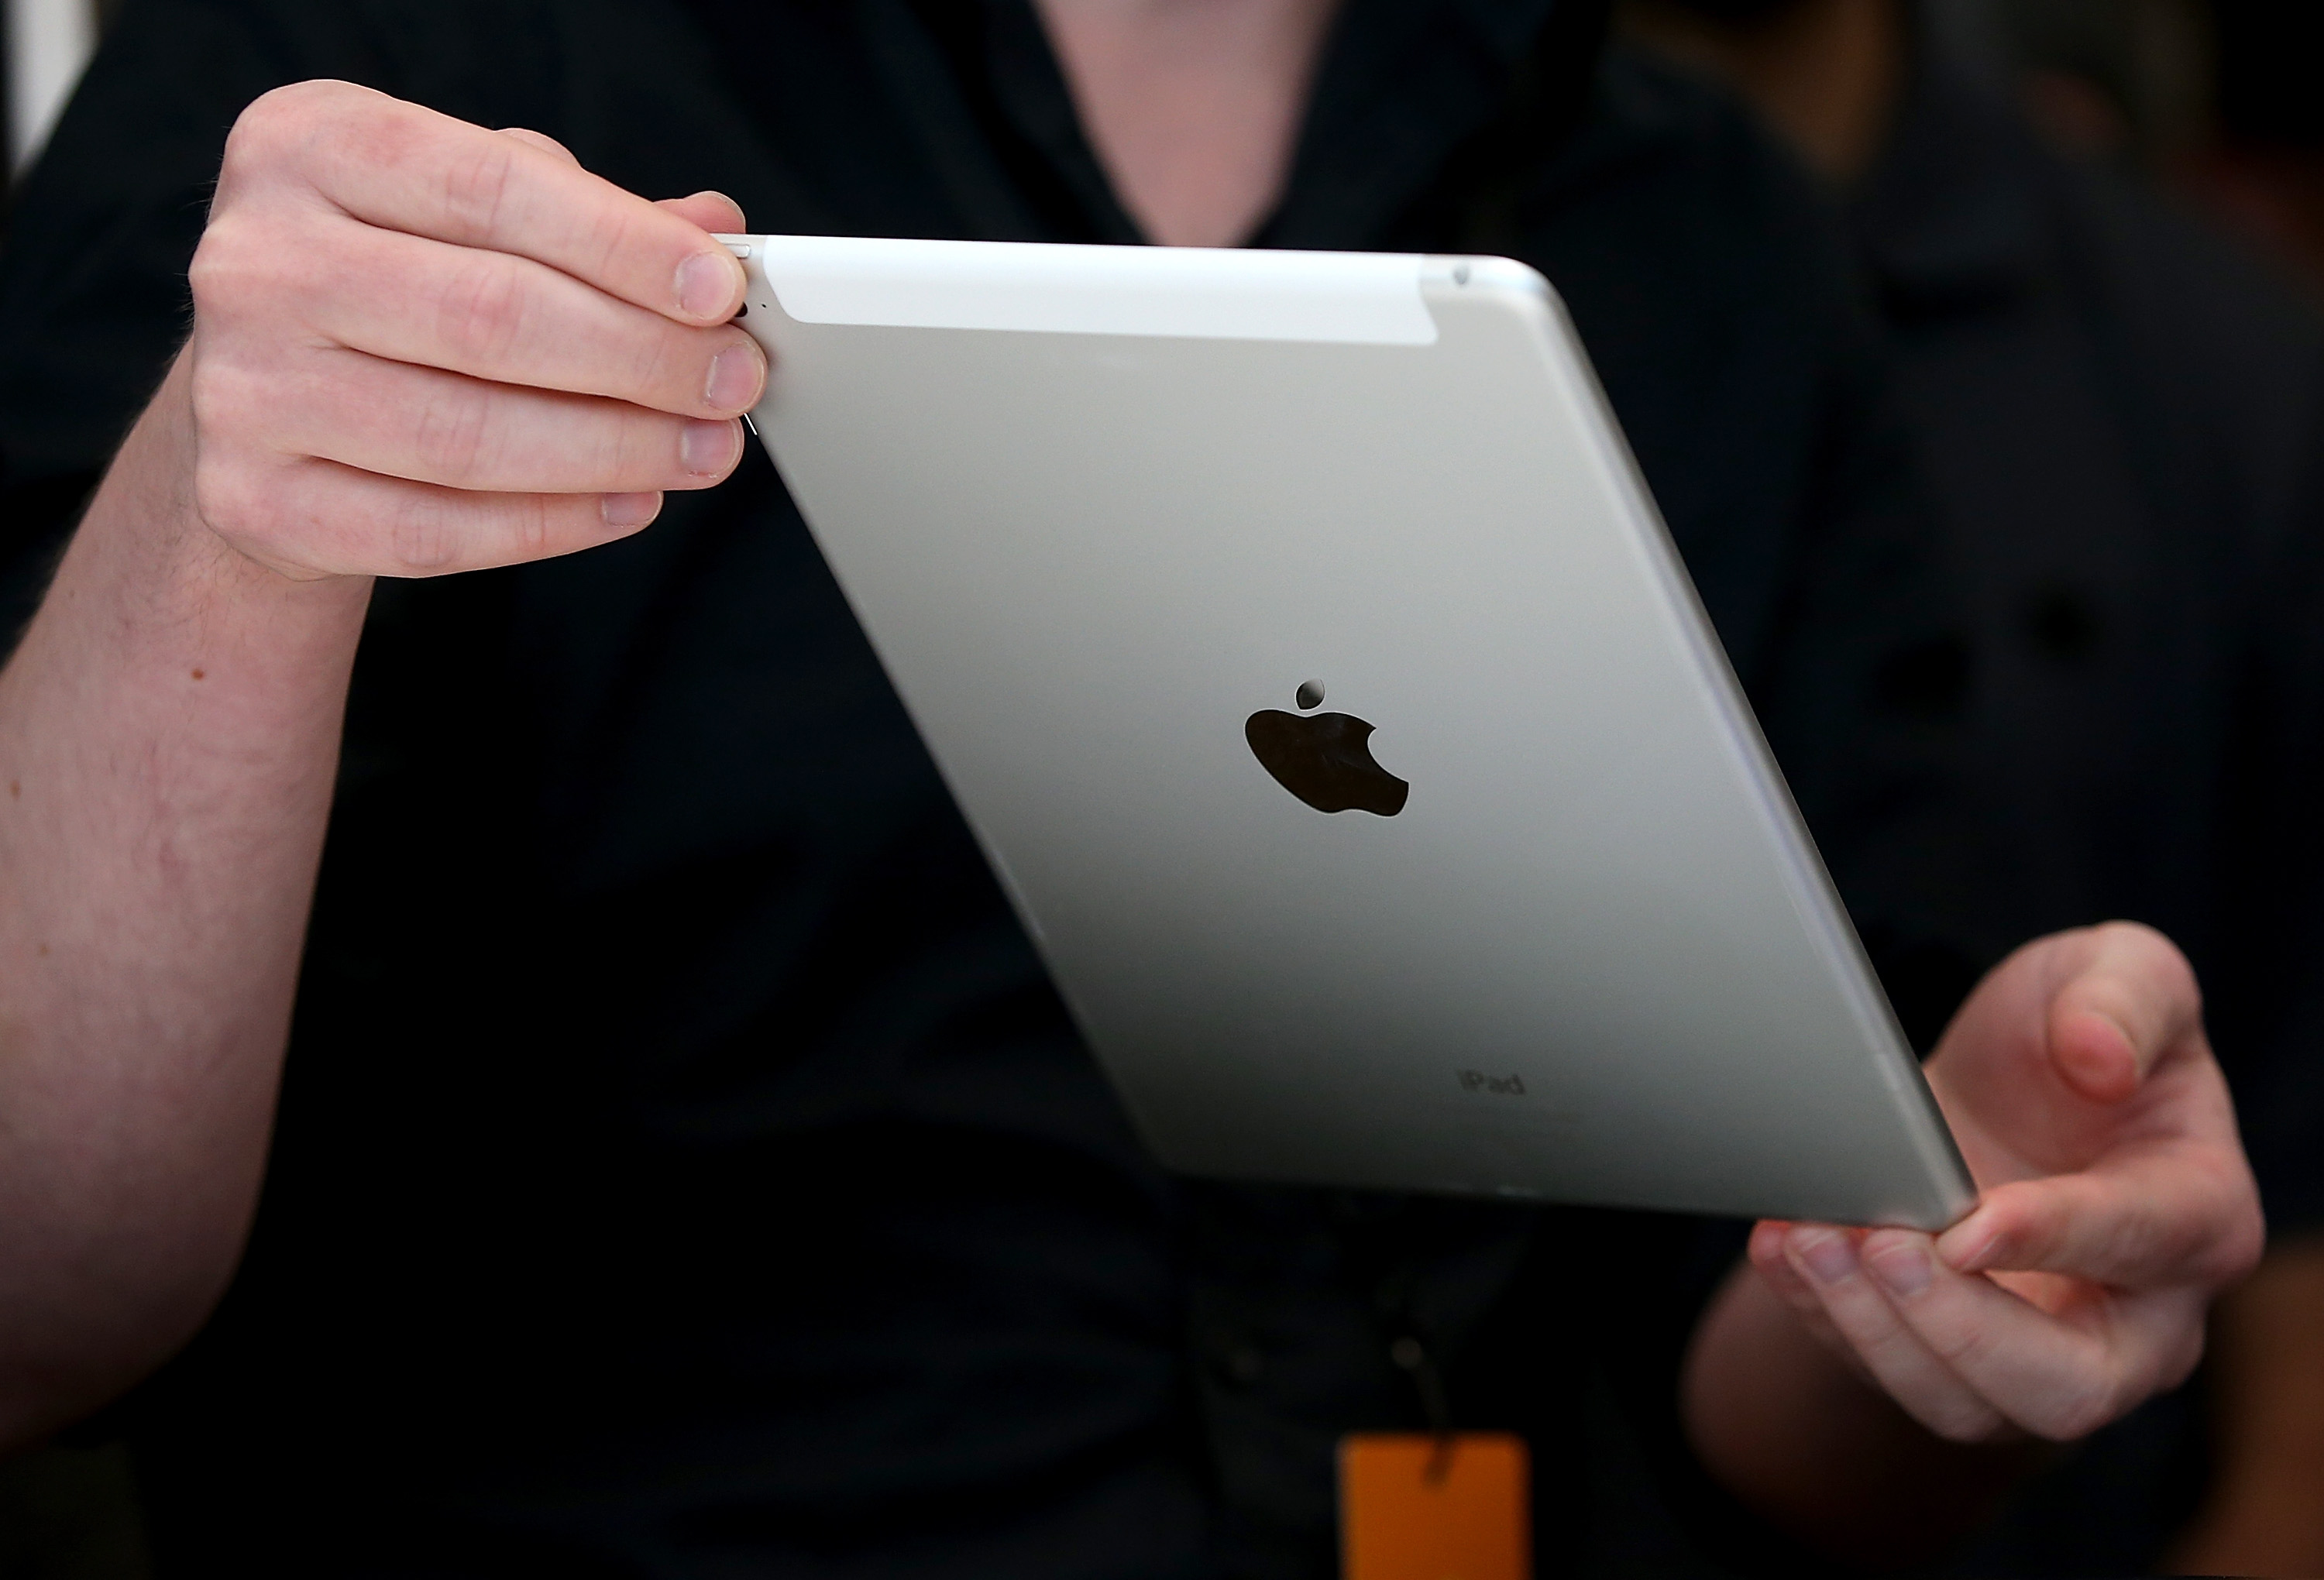 An attendee inspects new iPad Air 2 during an Apple special event on Oct. 16, 2014 in Cupertino, Calif.